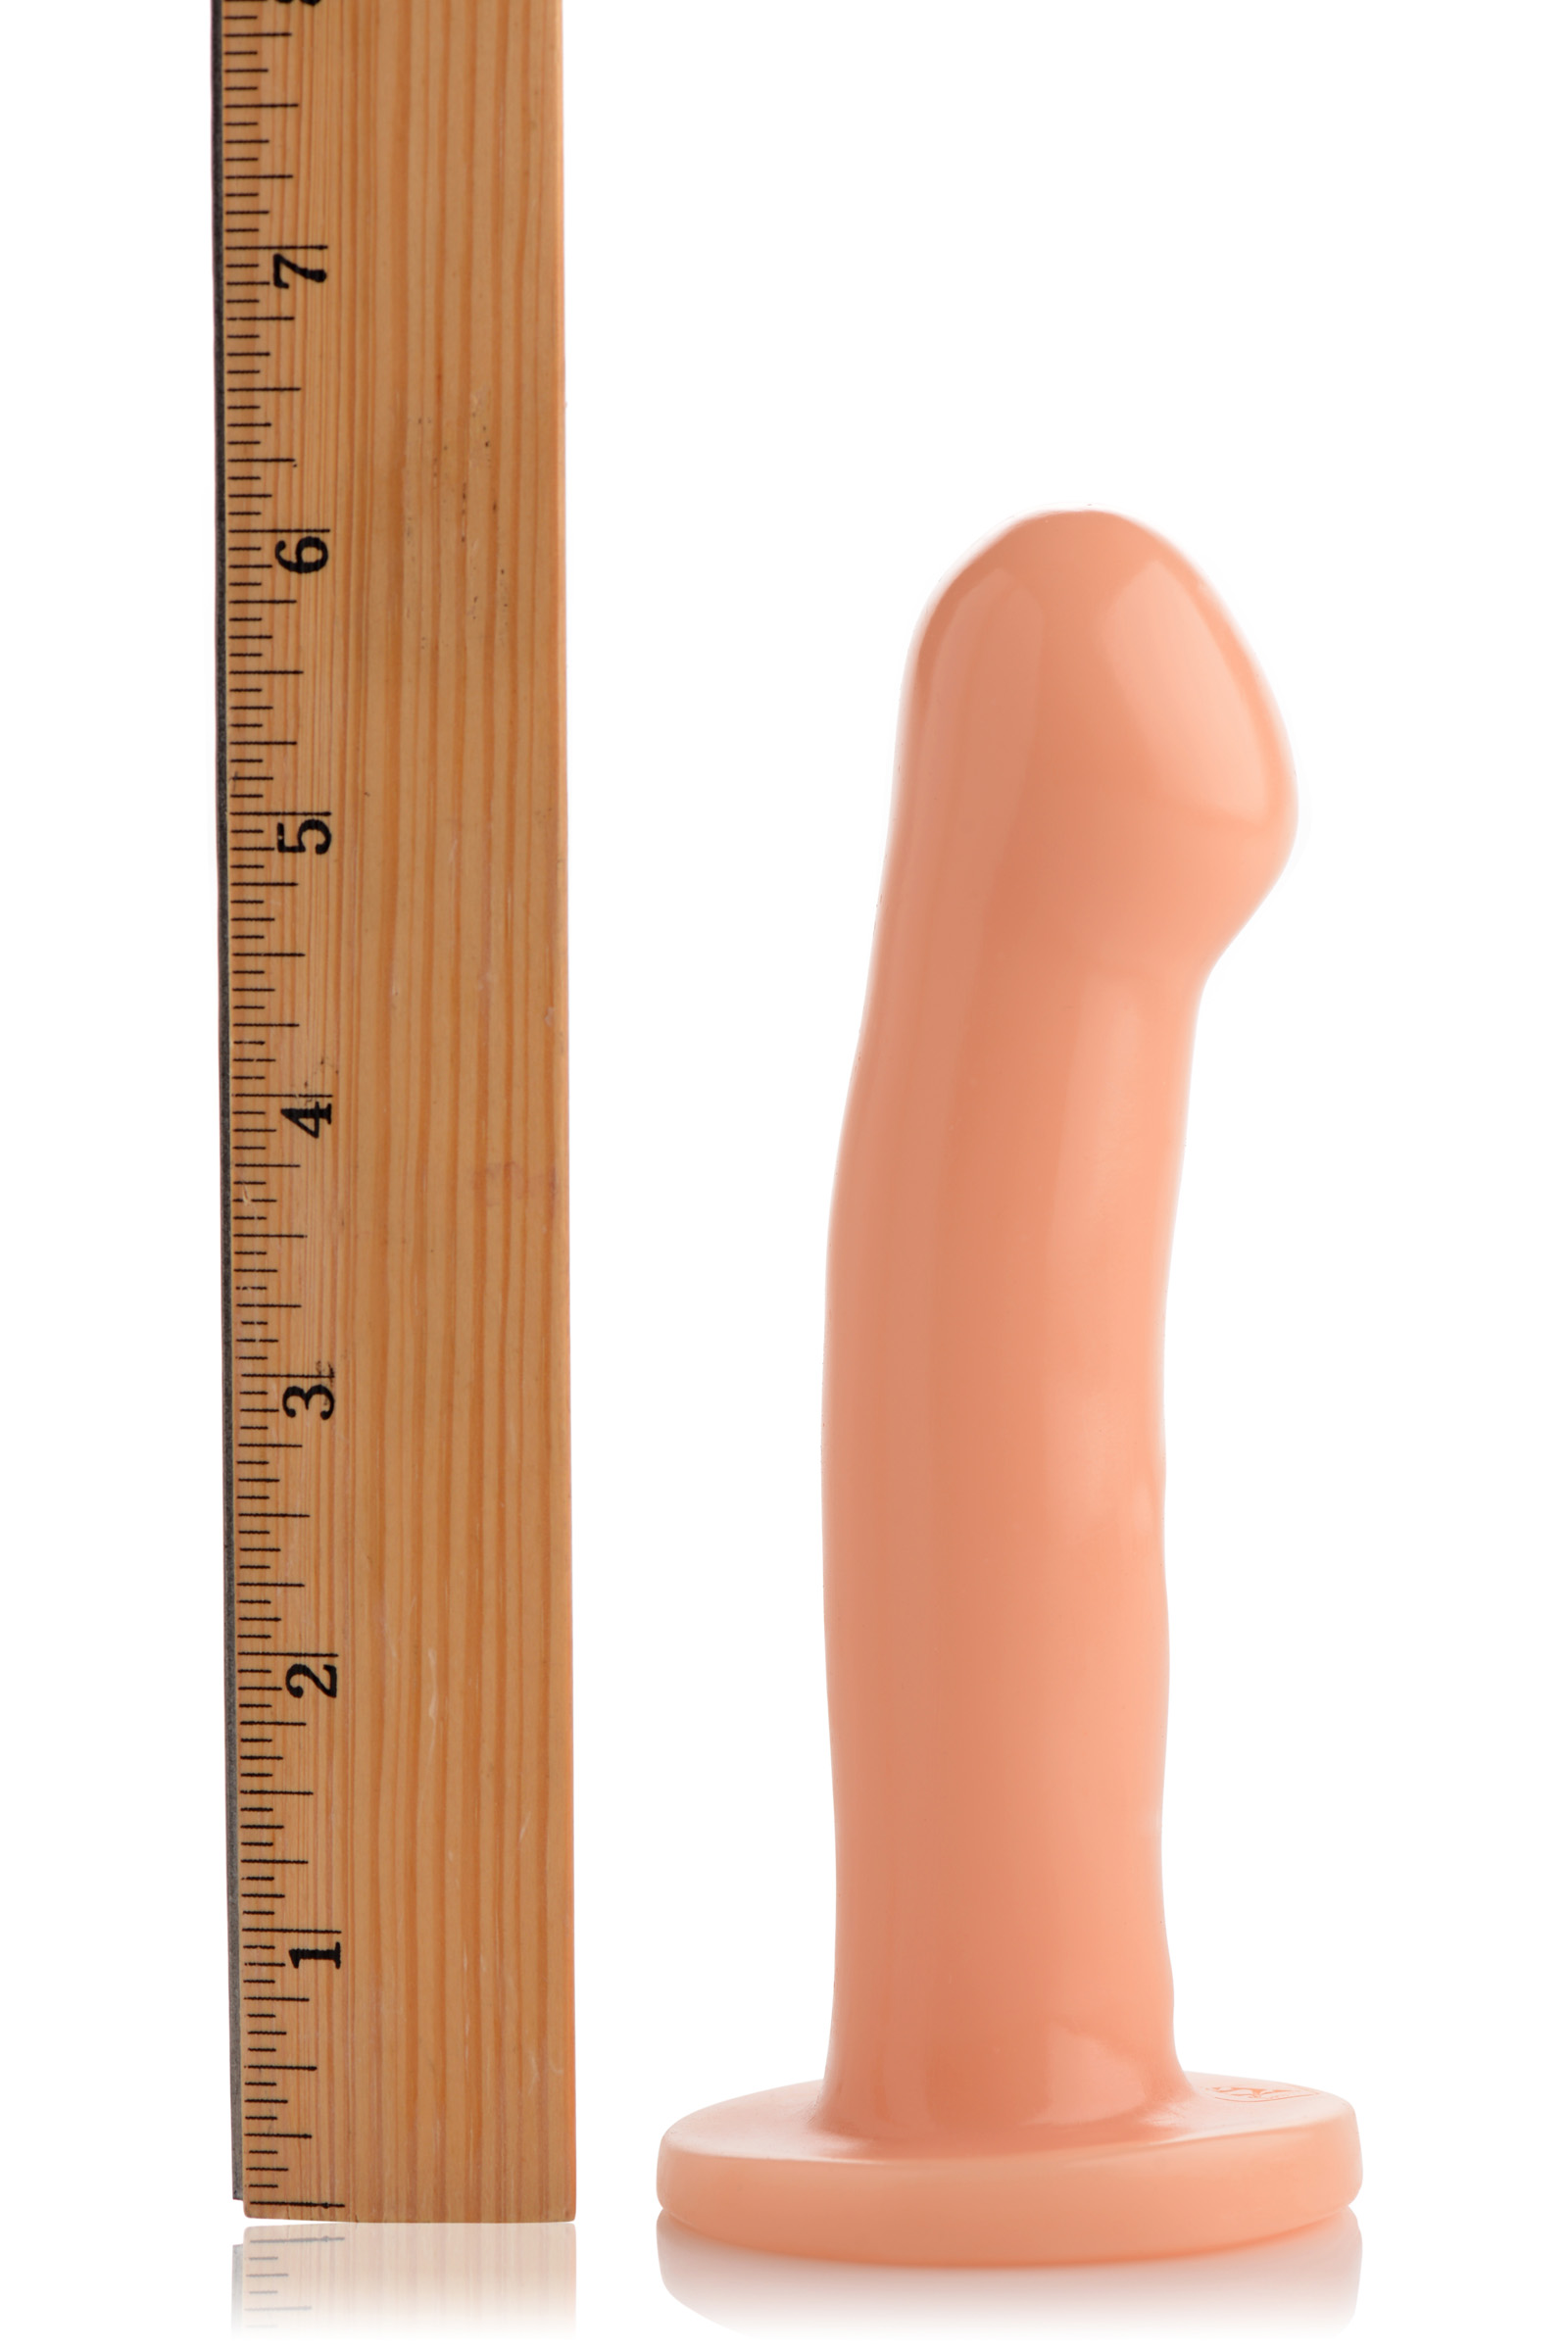 Beginner+Brad+6.5+Inch+Dildo+with+Suction+Cup